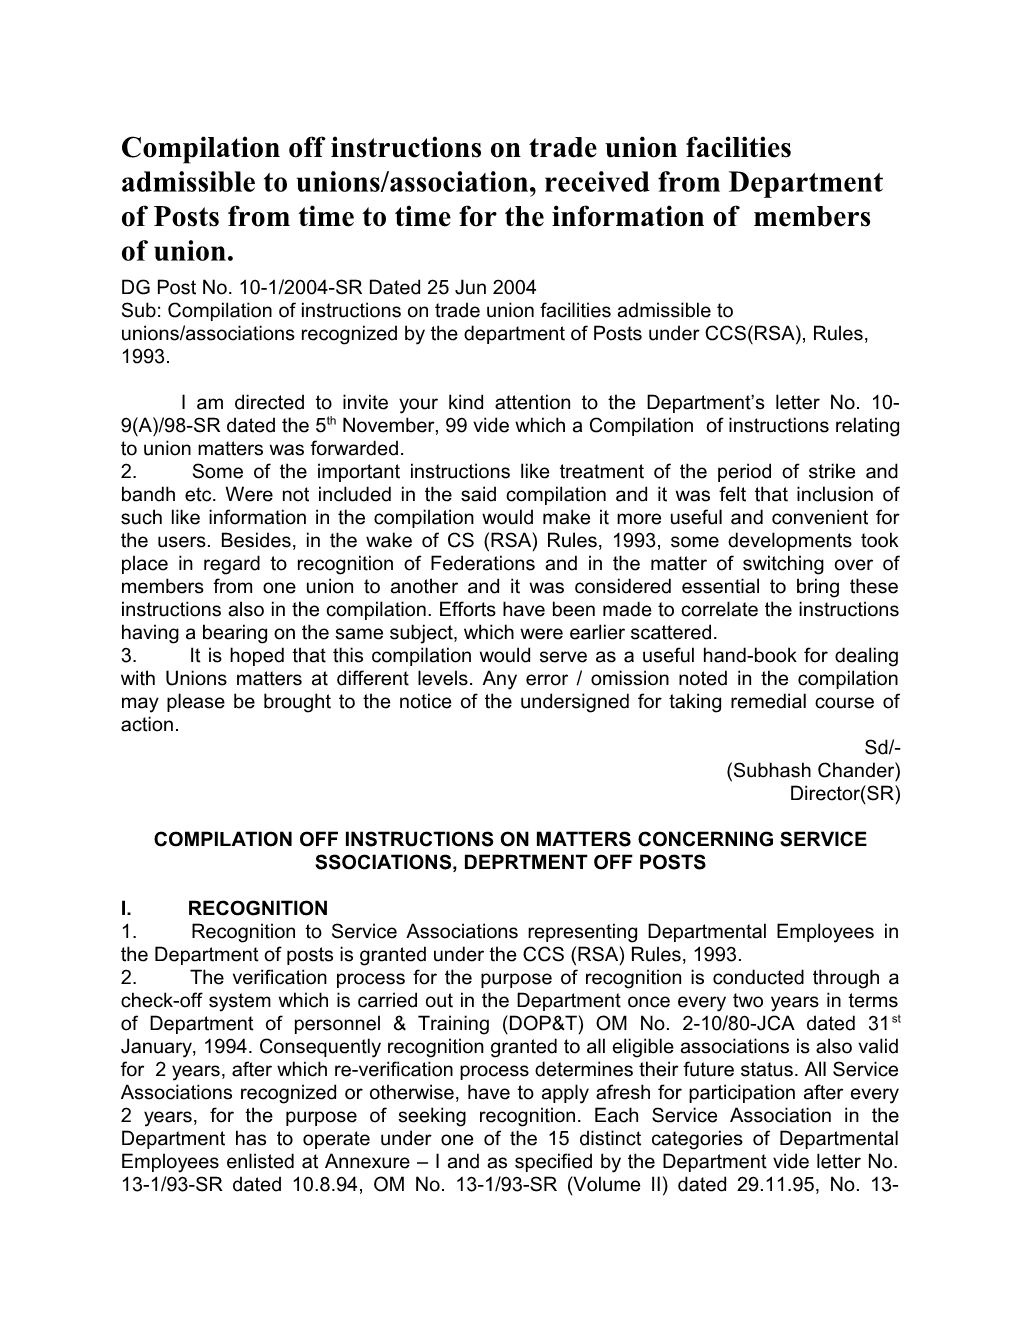 Compilation Off Instructions on Trade Union Facilities Admissible to Unions/Association